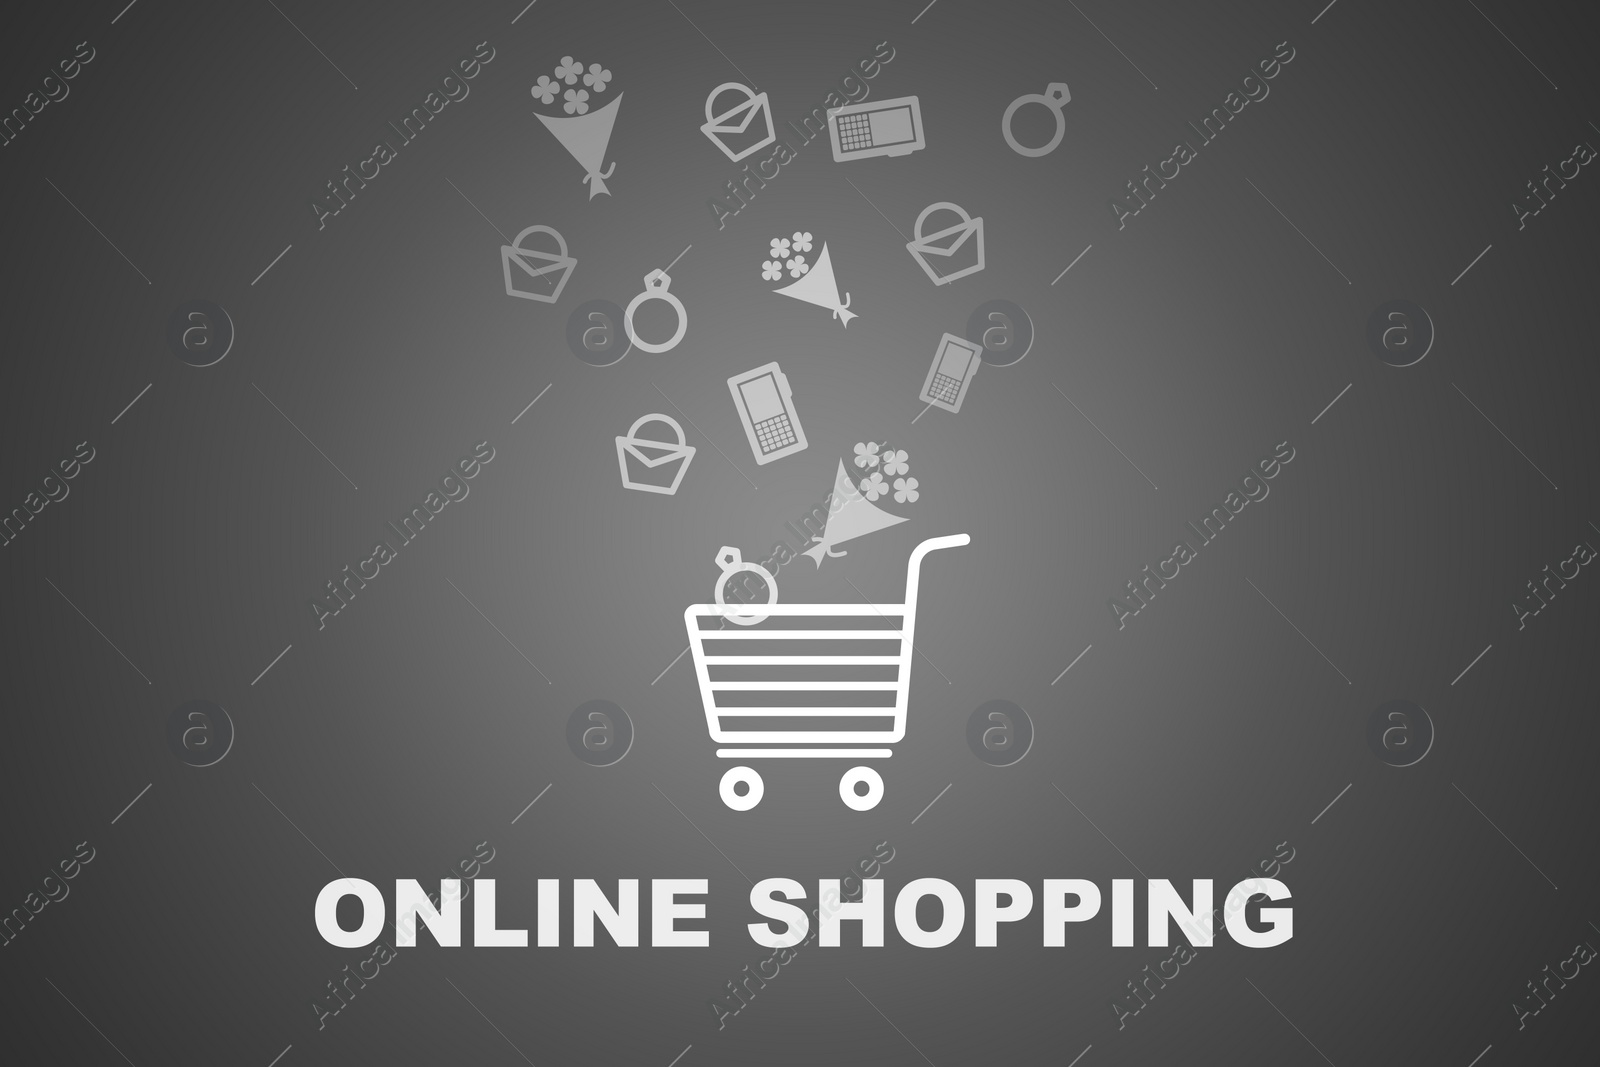 Illustration of Online shopping.  different stuff falling into cart on grey background